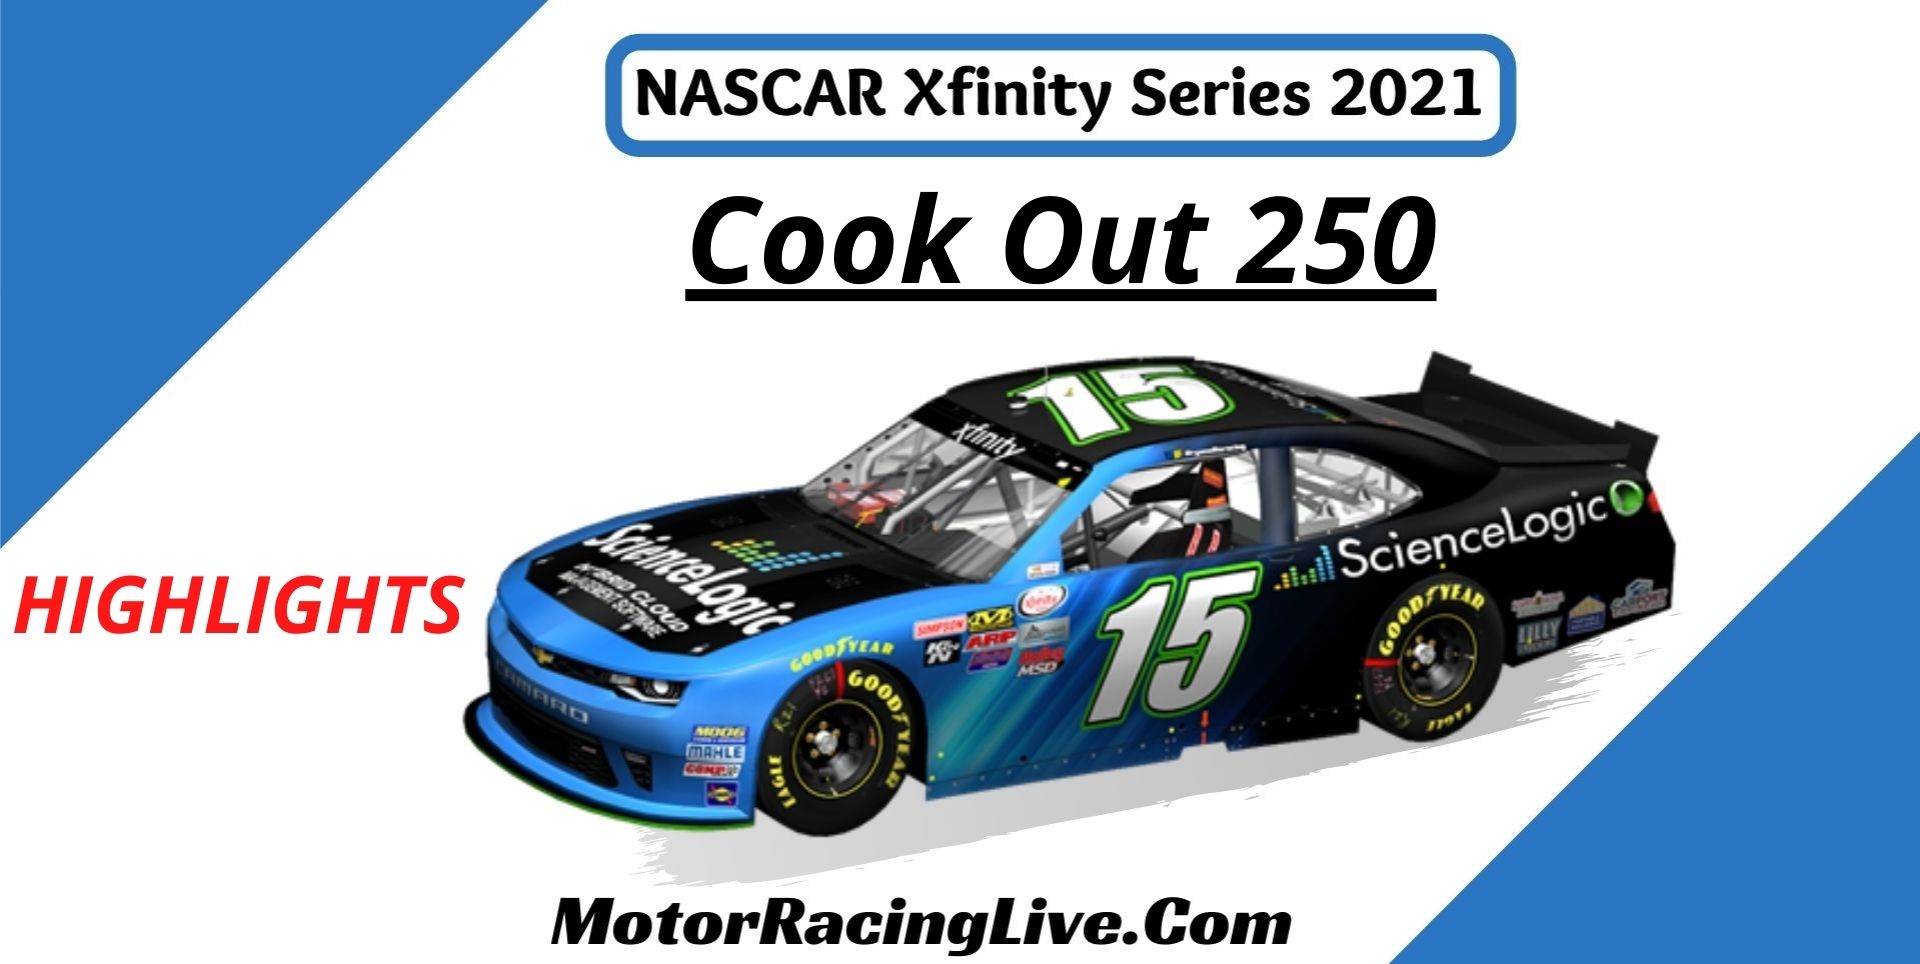 Cook Out 250 Highlights 2021 NASCAR Xfinity Series